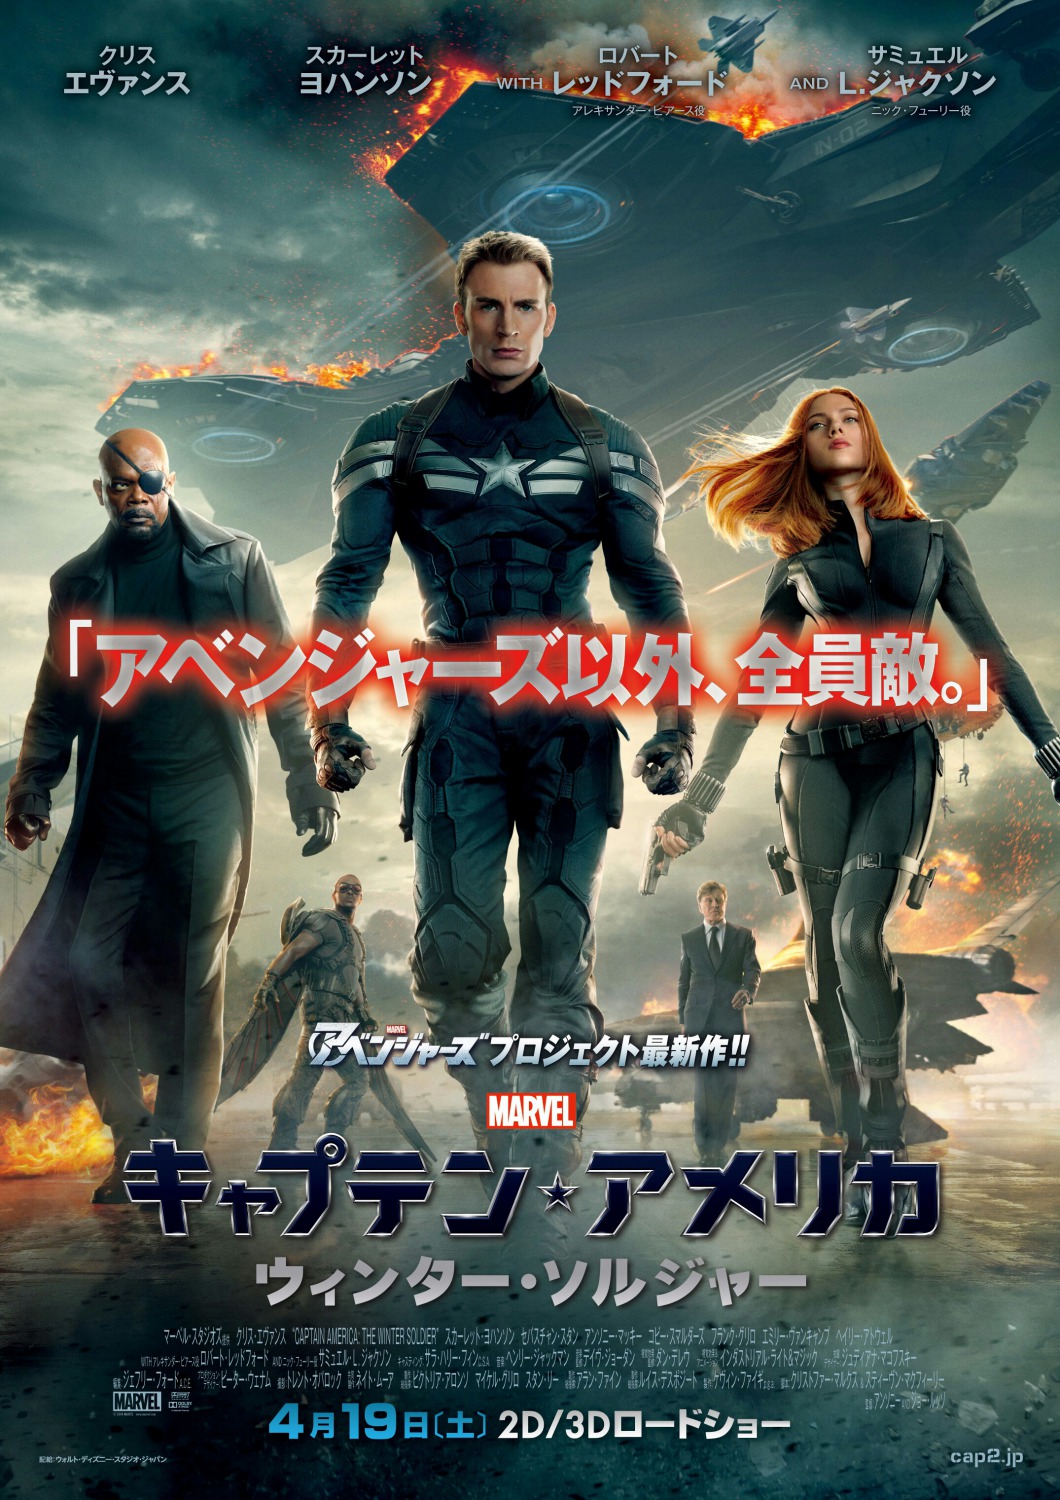 Extra Large Movie Poster Image for Captain America: The Winter Soldier (#10 of 21)